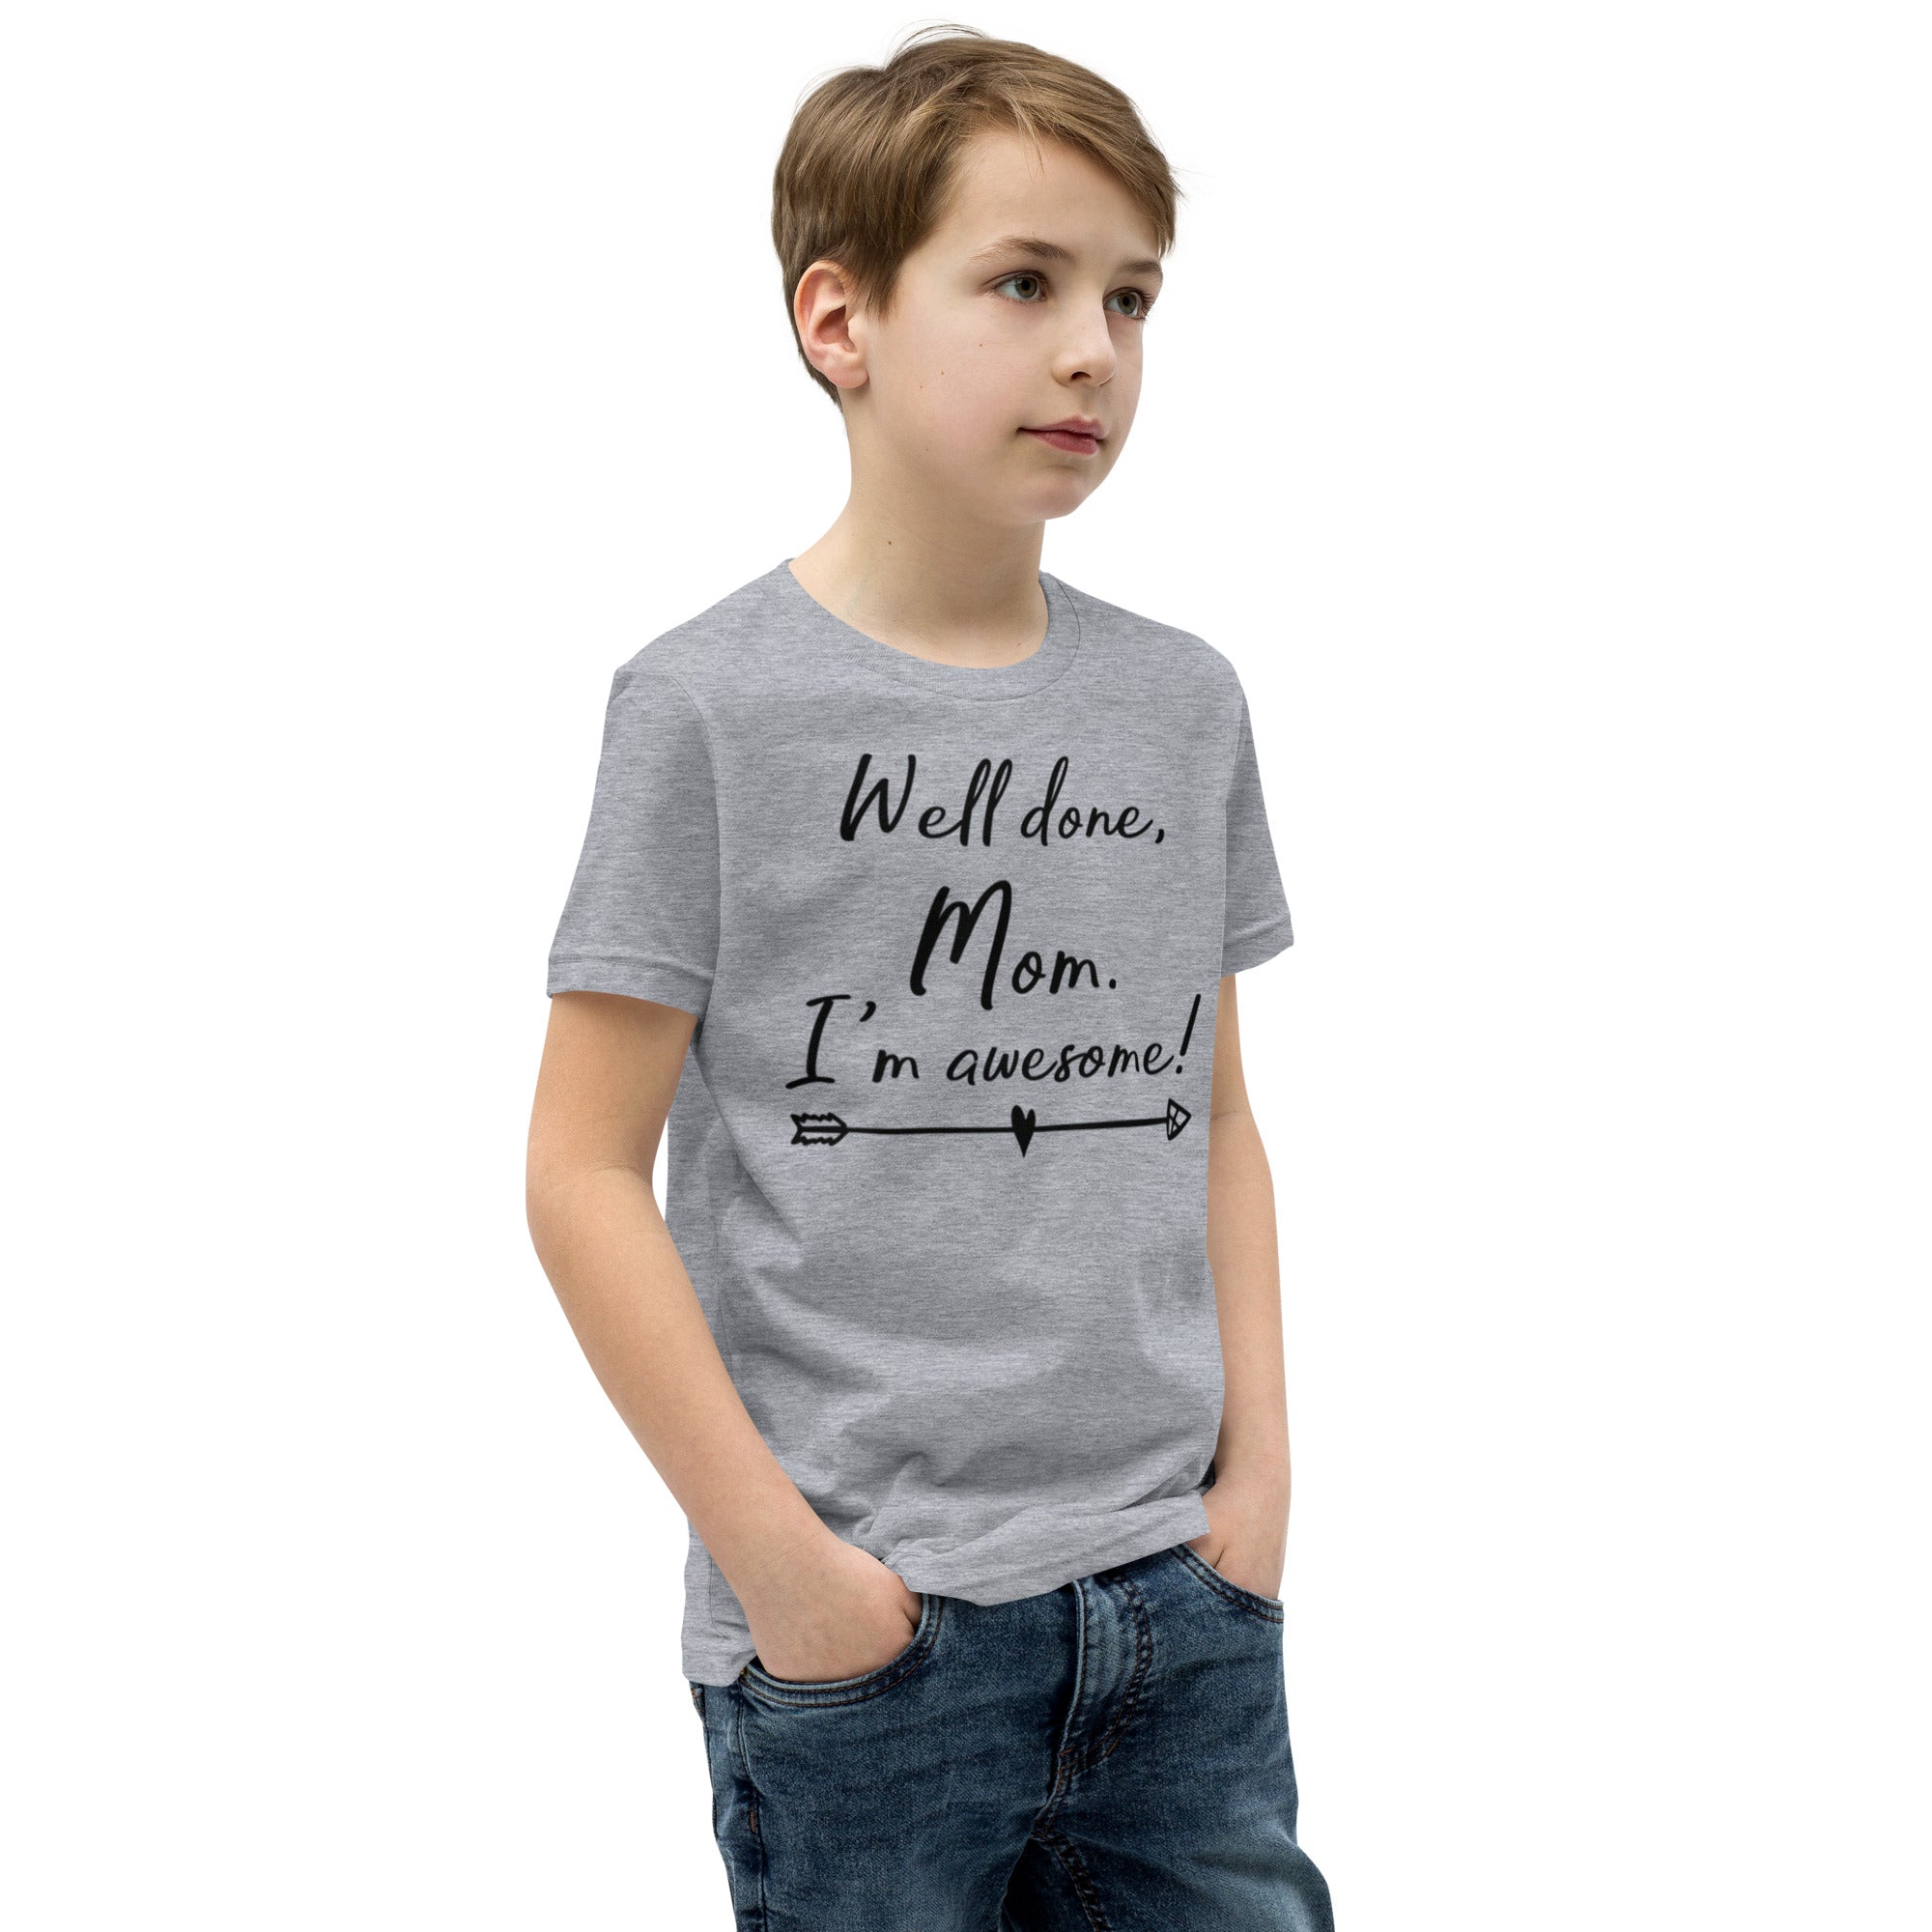 Youth Short Sleeve T-Shirt, Well Done Mom, Back to School, Play T shirt gift